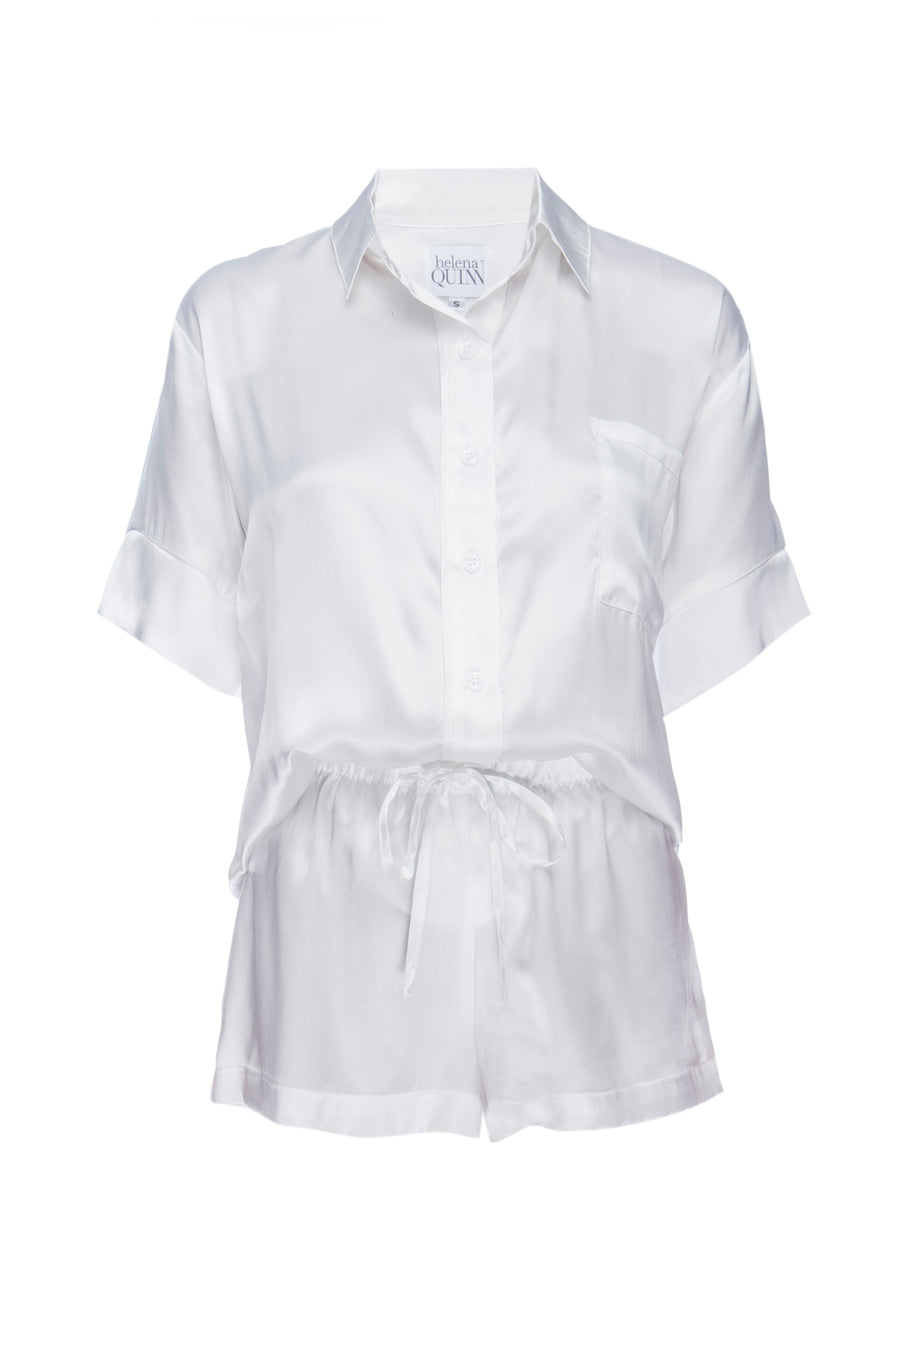 Silk Charmeuse Short-Sleeved Top: Ivory